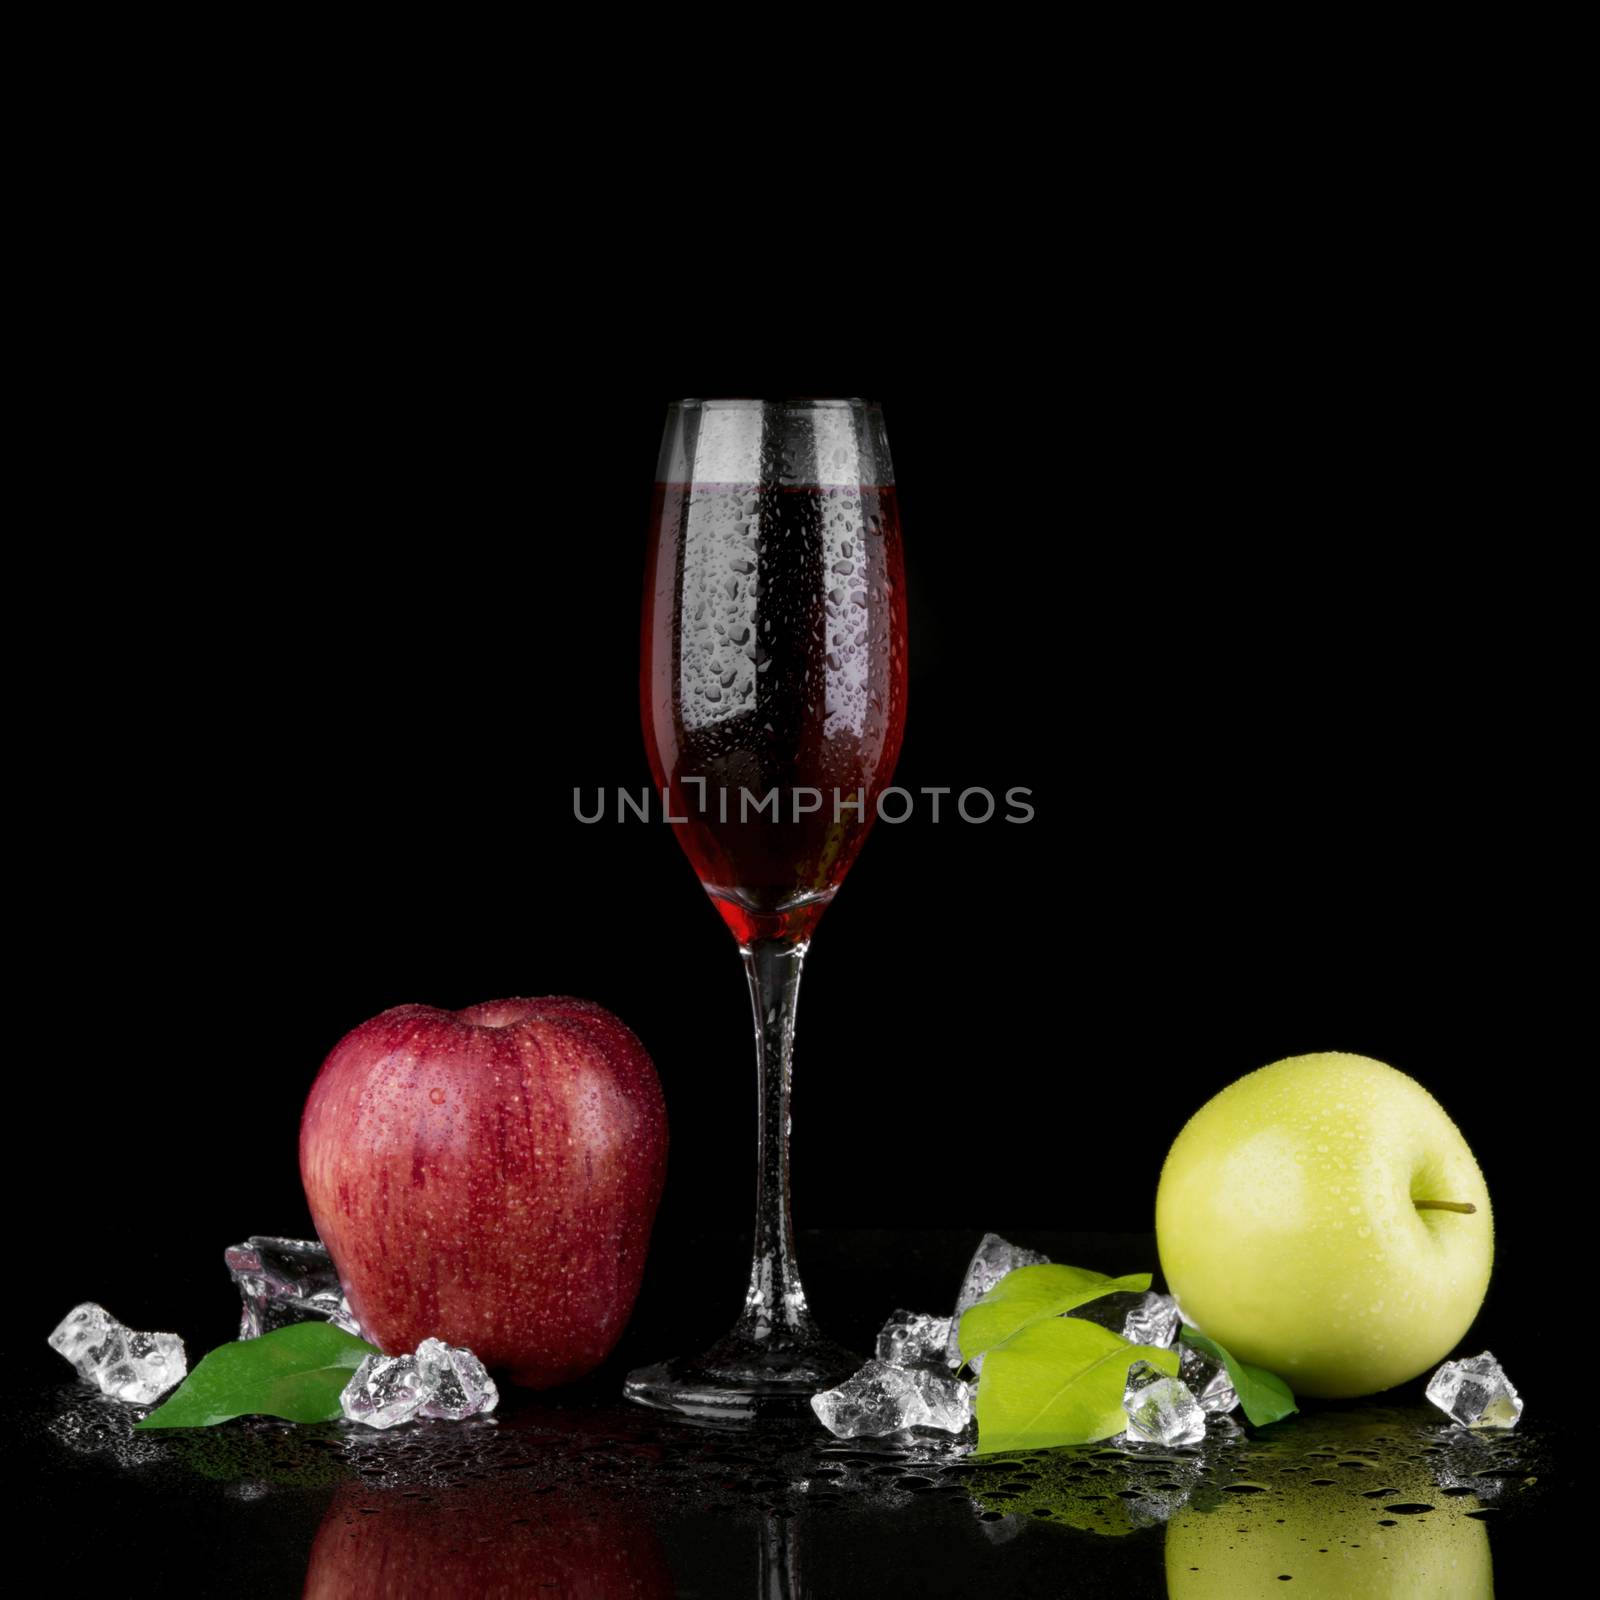 Green and red apple with a glass of champagne on black background